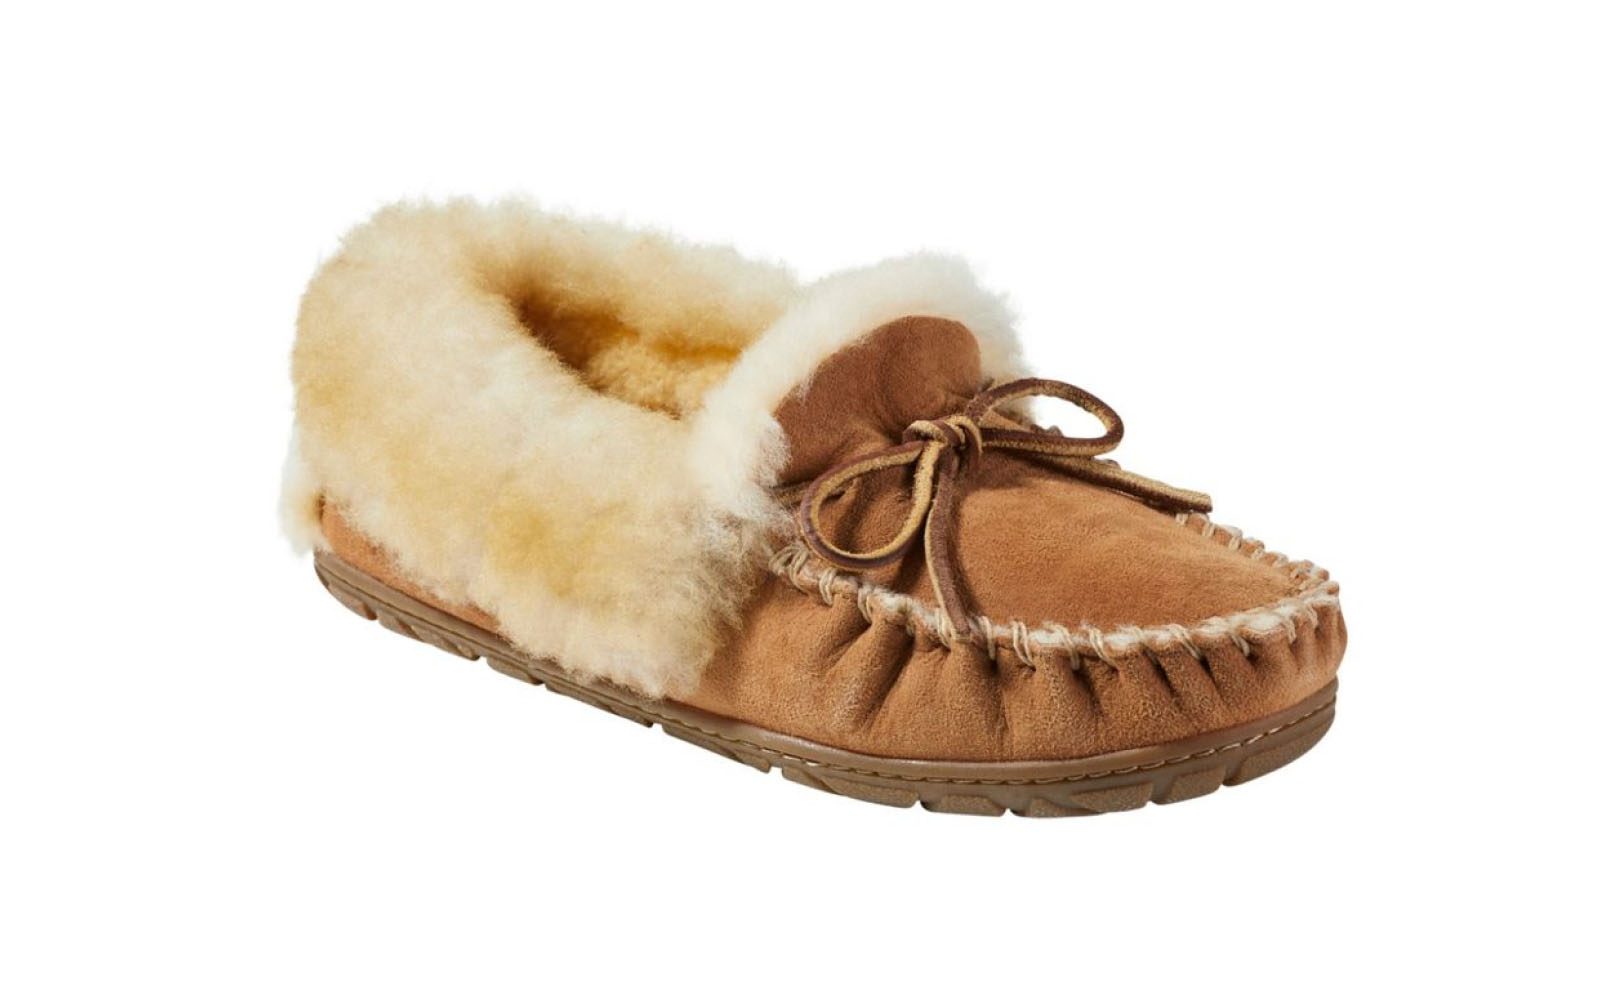 A pair of moccasins.